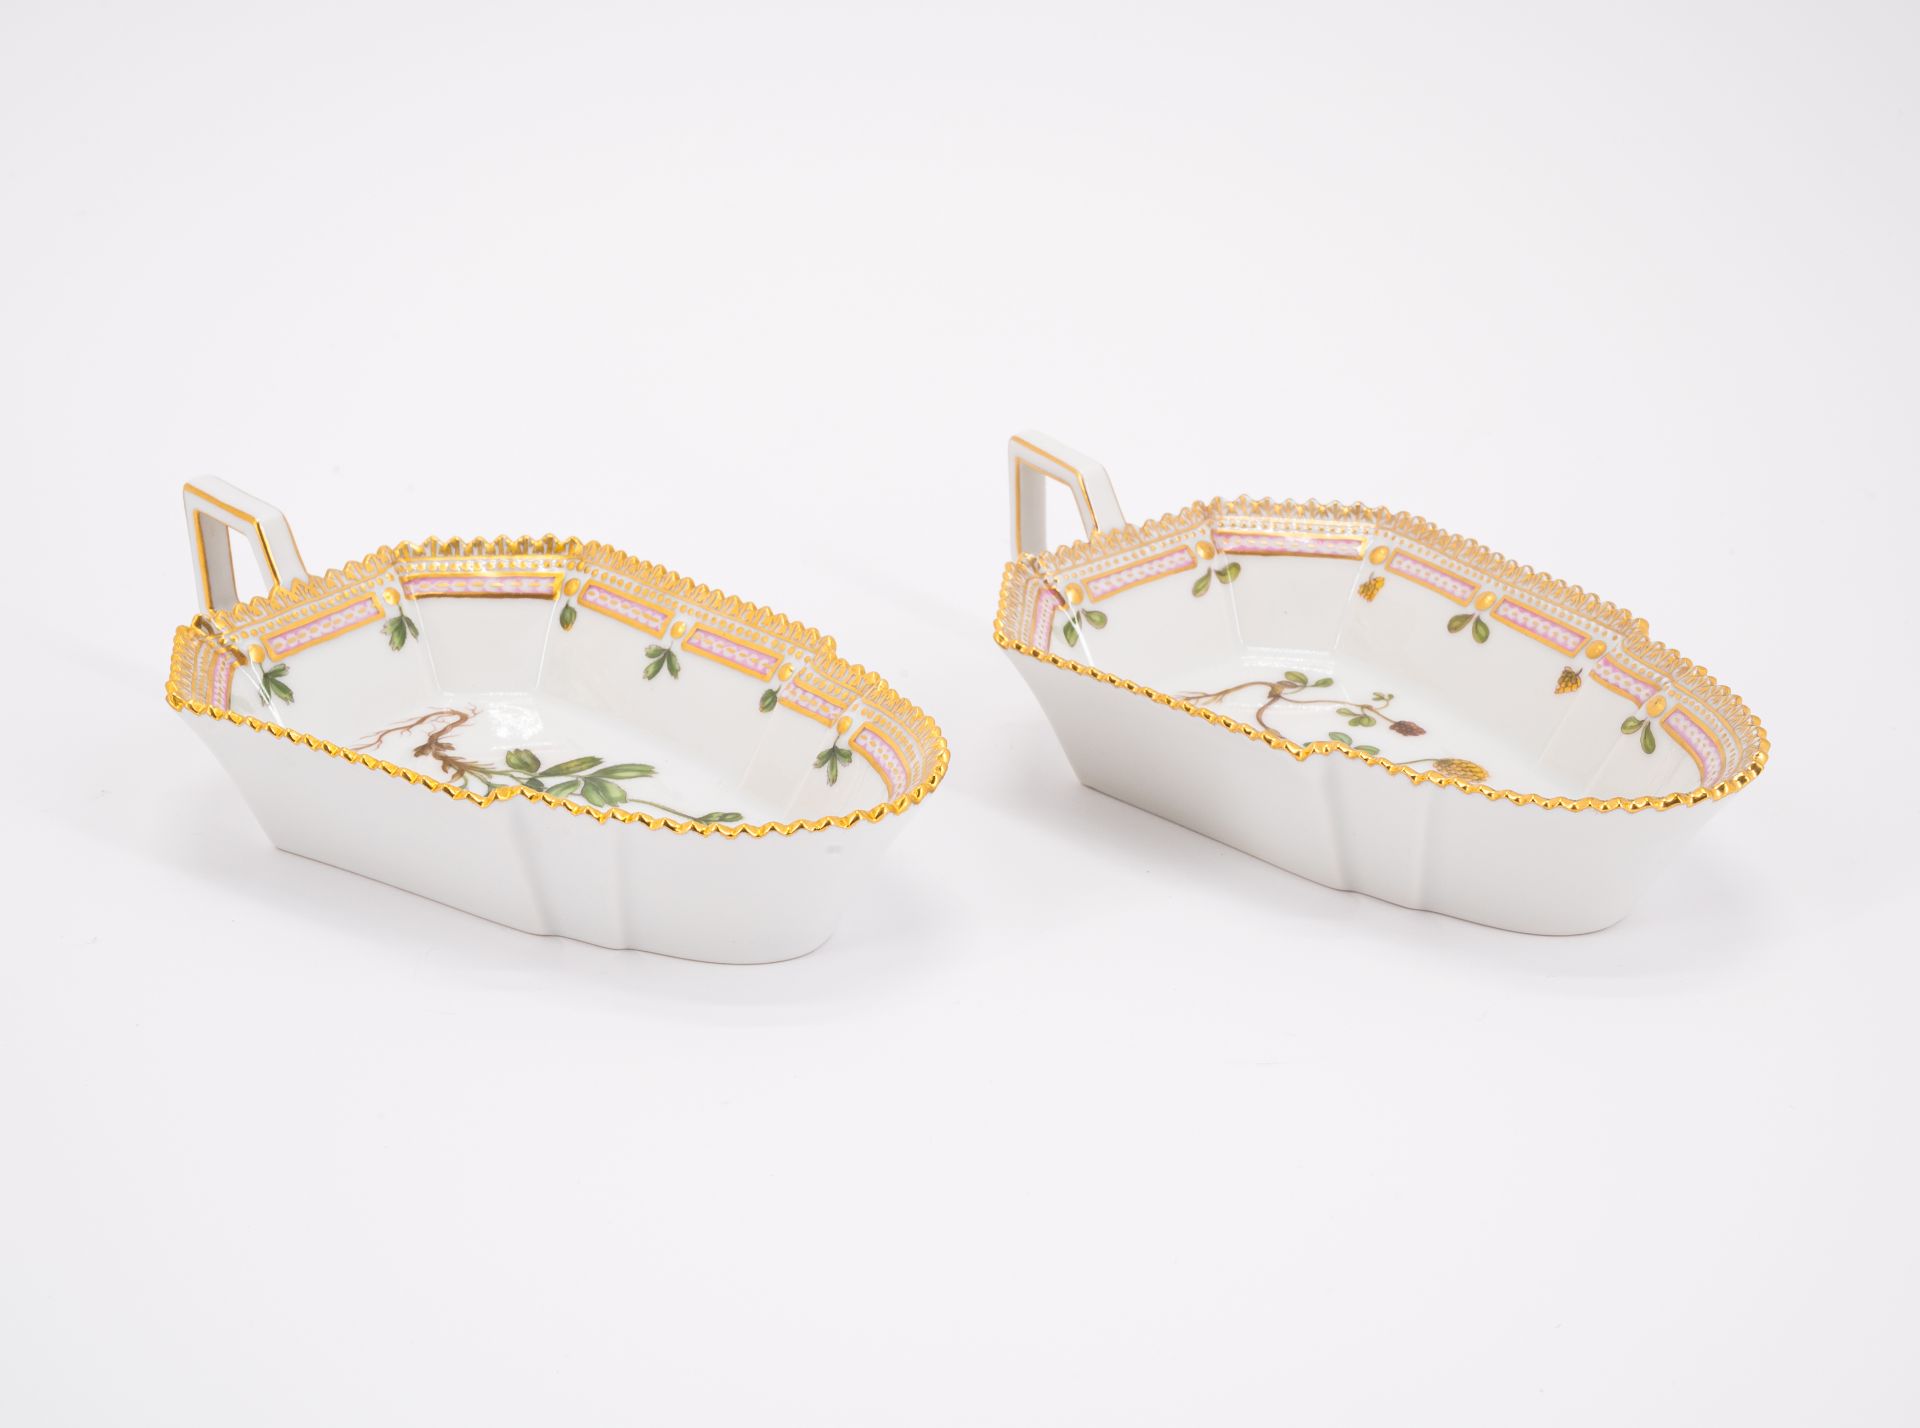 Royal Copenhagen: 95 PIECES FROM A 'FLORA DANICA' DINING SERVICE - Image 24 of 26